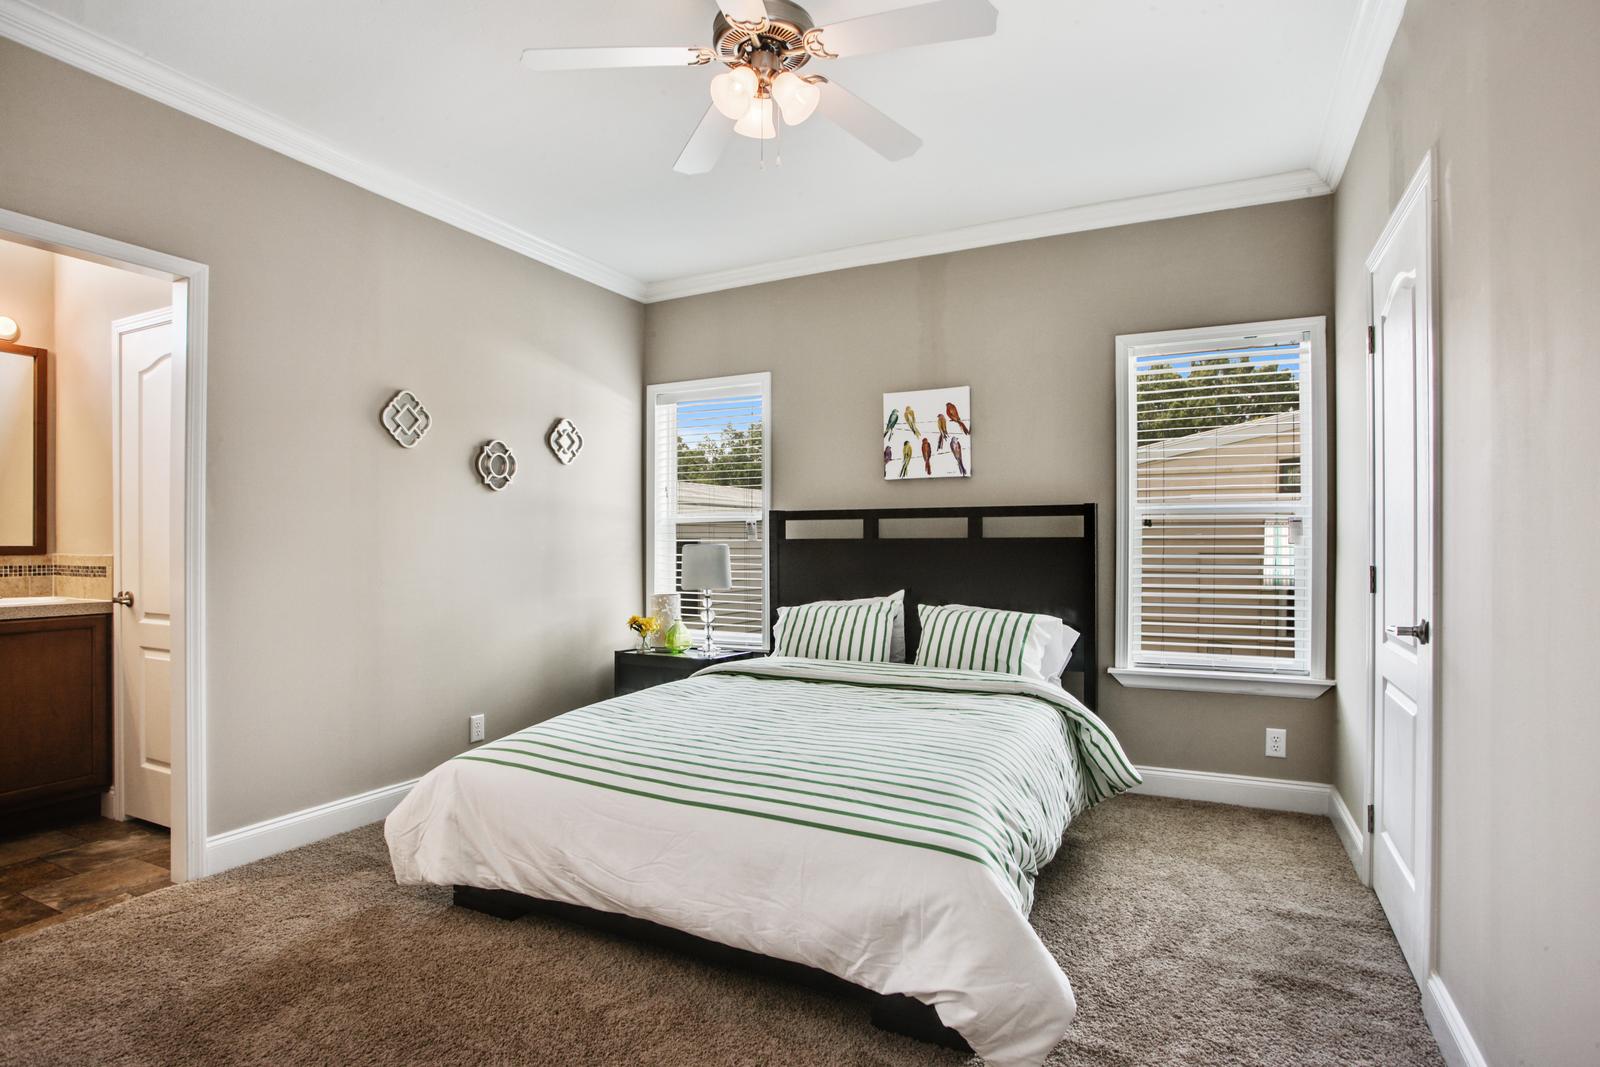 Bedroom with attached bathroom. Light gray walls with crown molding on top and bottom. Two windows. Queen sized bed with dark wood headboard and end table. Light brown carpeting.